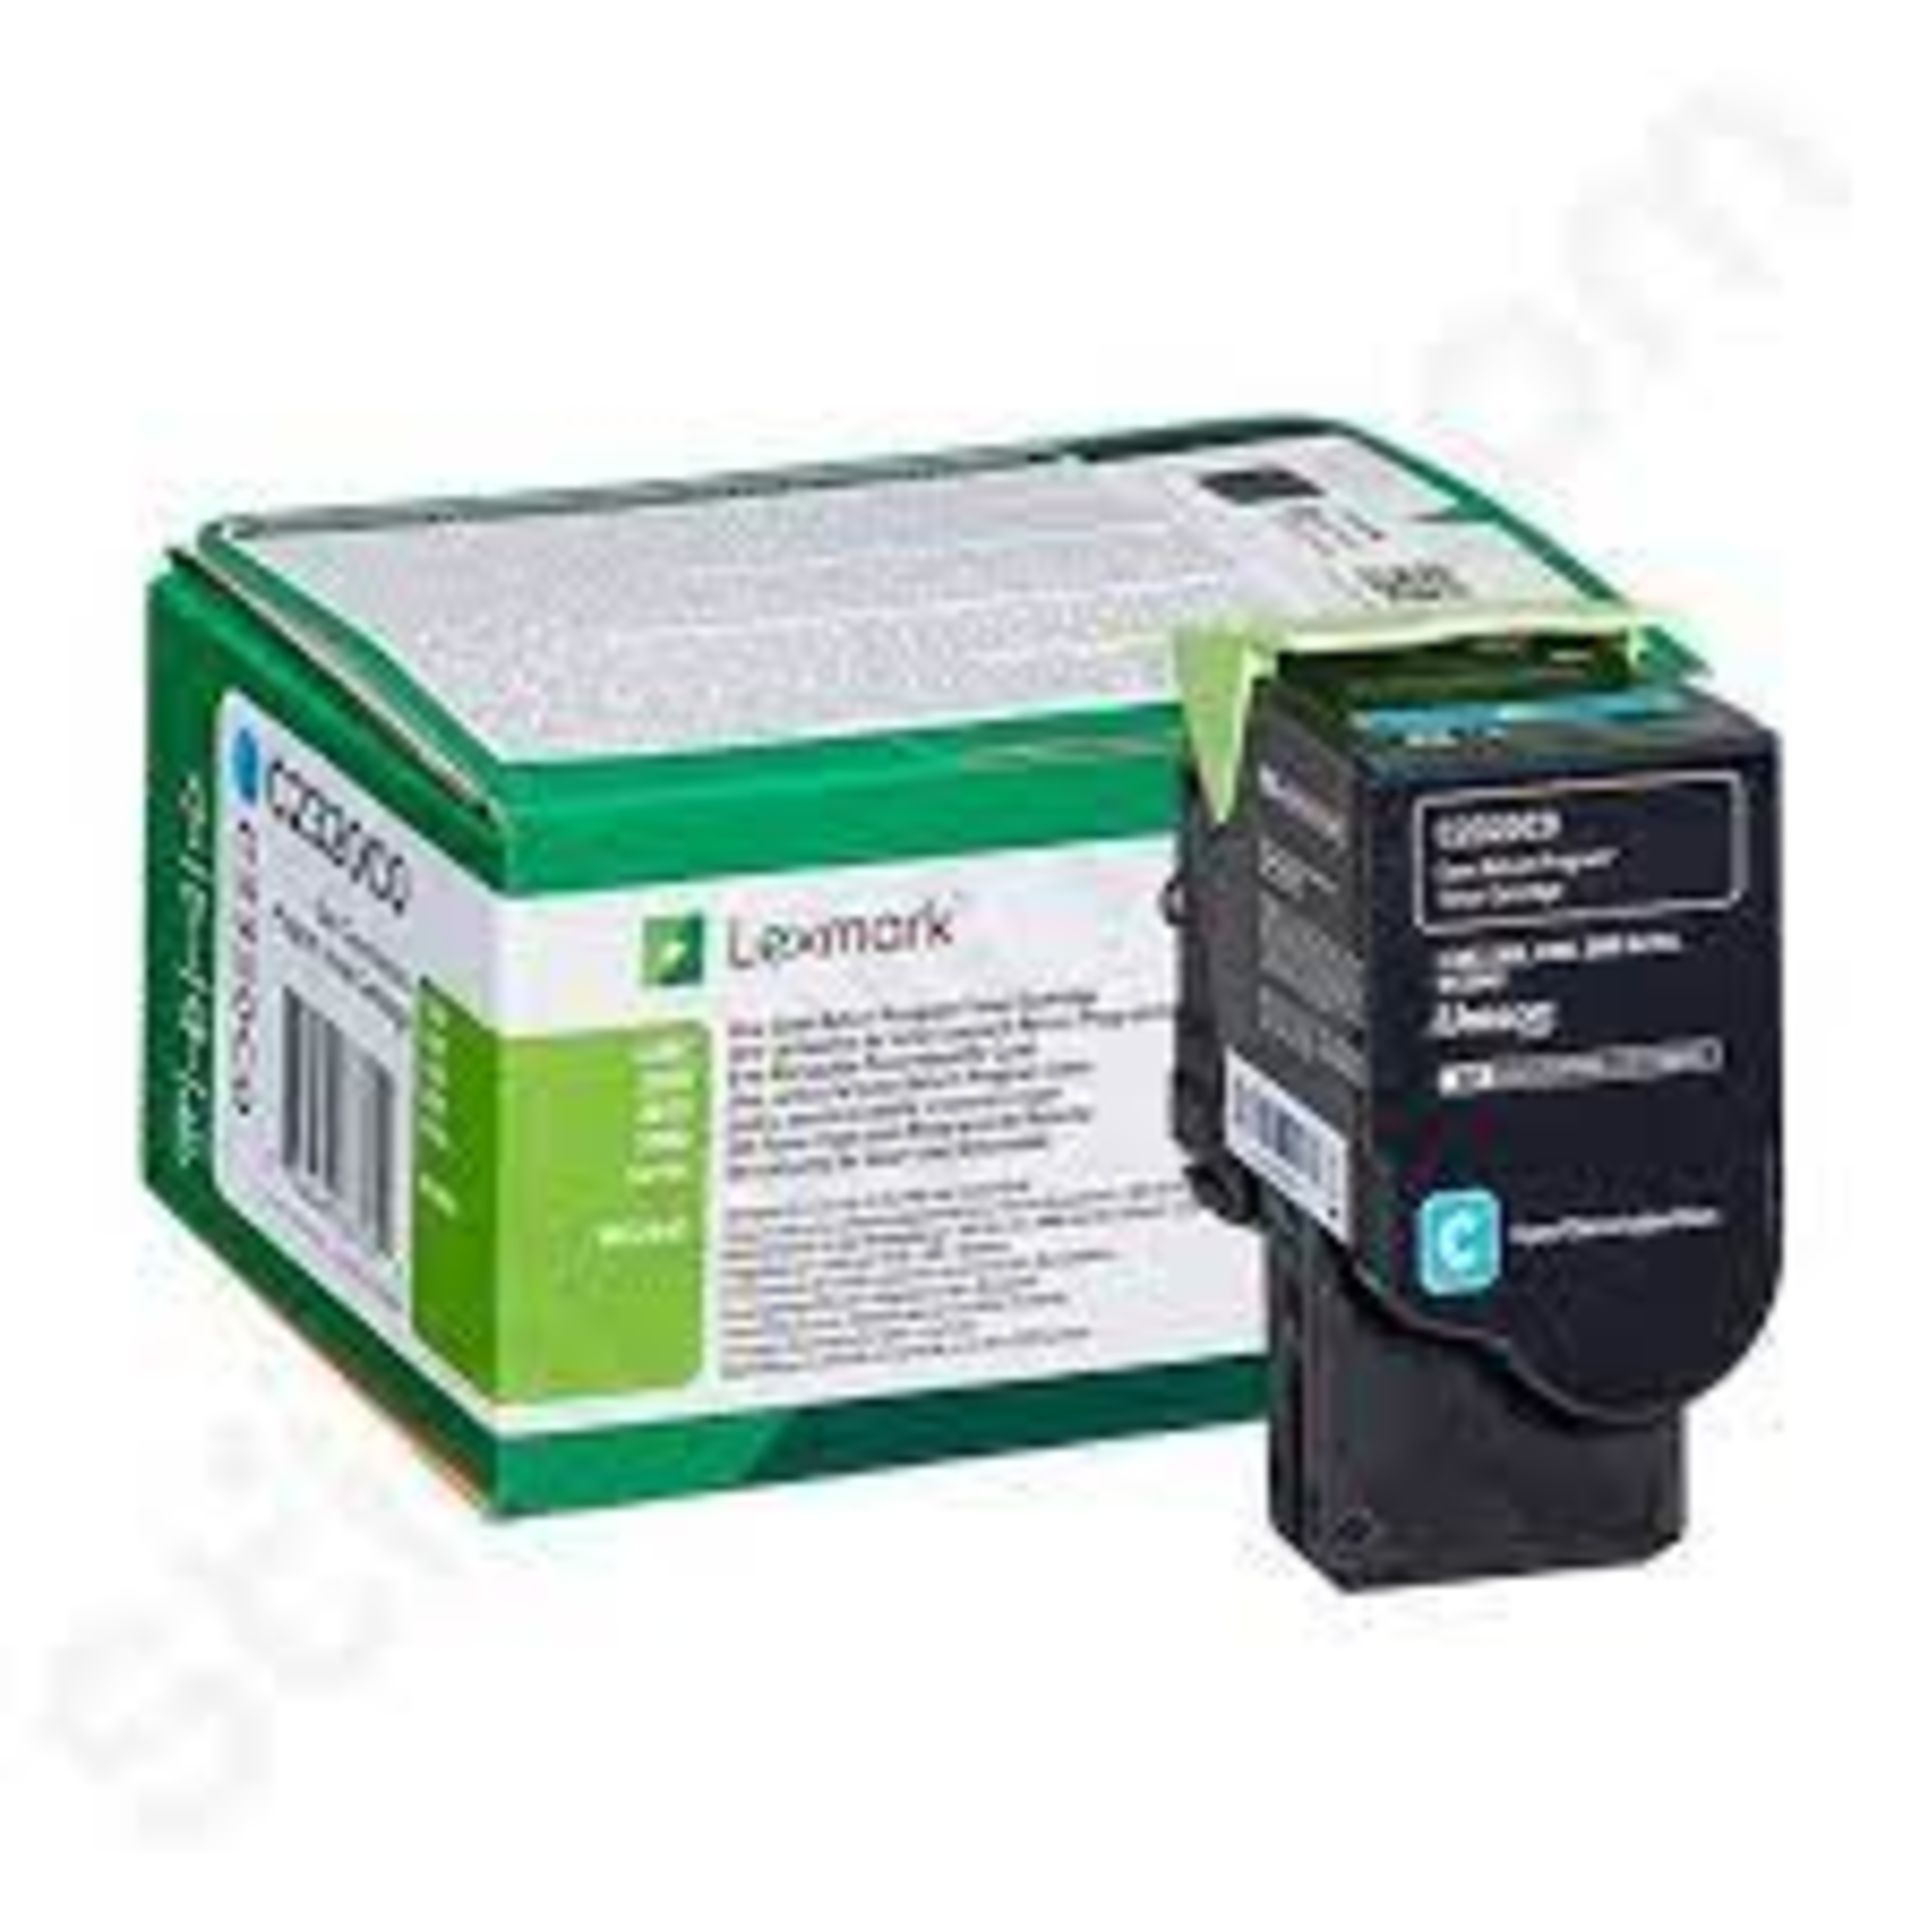 OVER 16000 BRAND NEW PRINTER CARTRIDGES/TONERS COMPATIBLE WITH BROTHER, EPSON, HP, CANON ETC. OVER 3